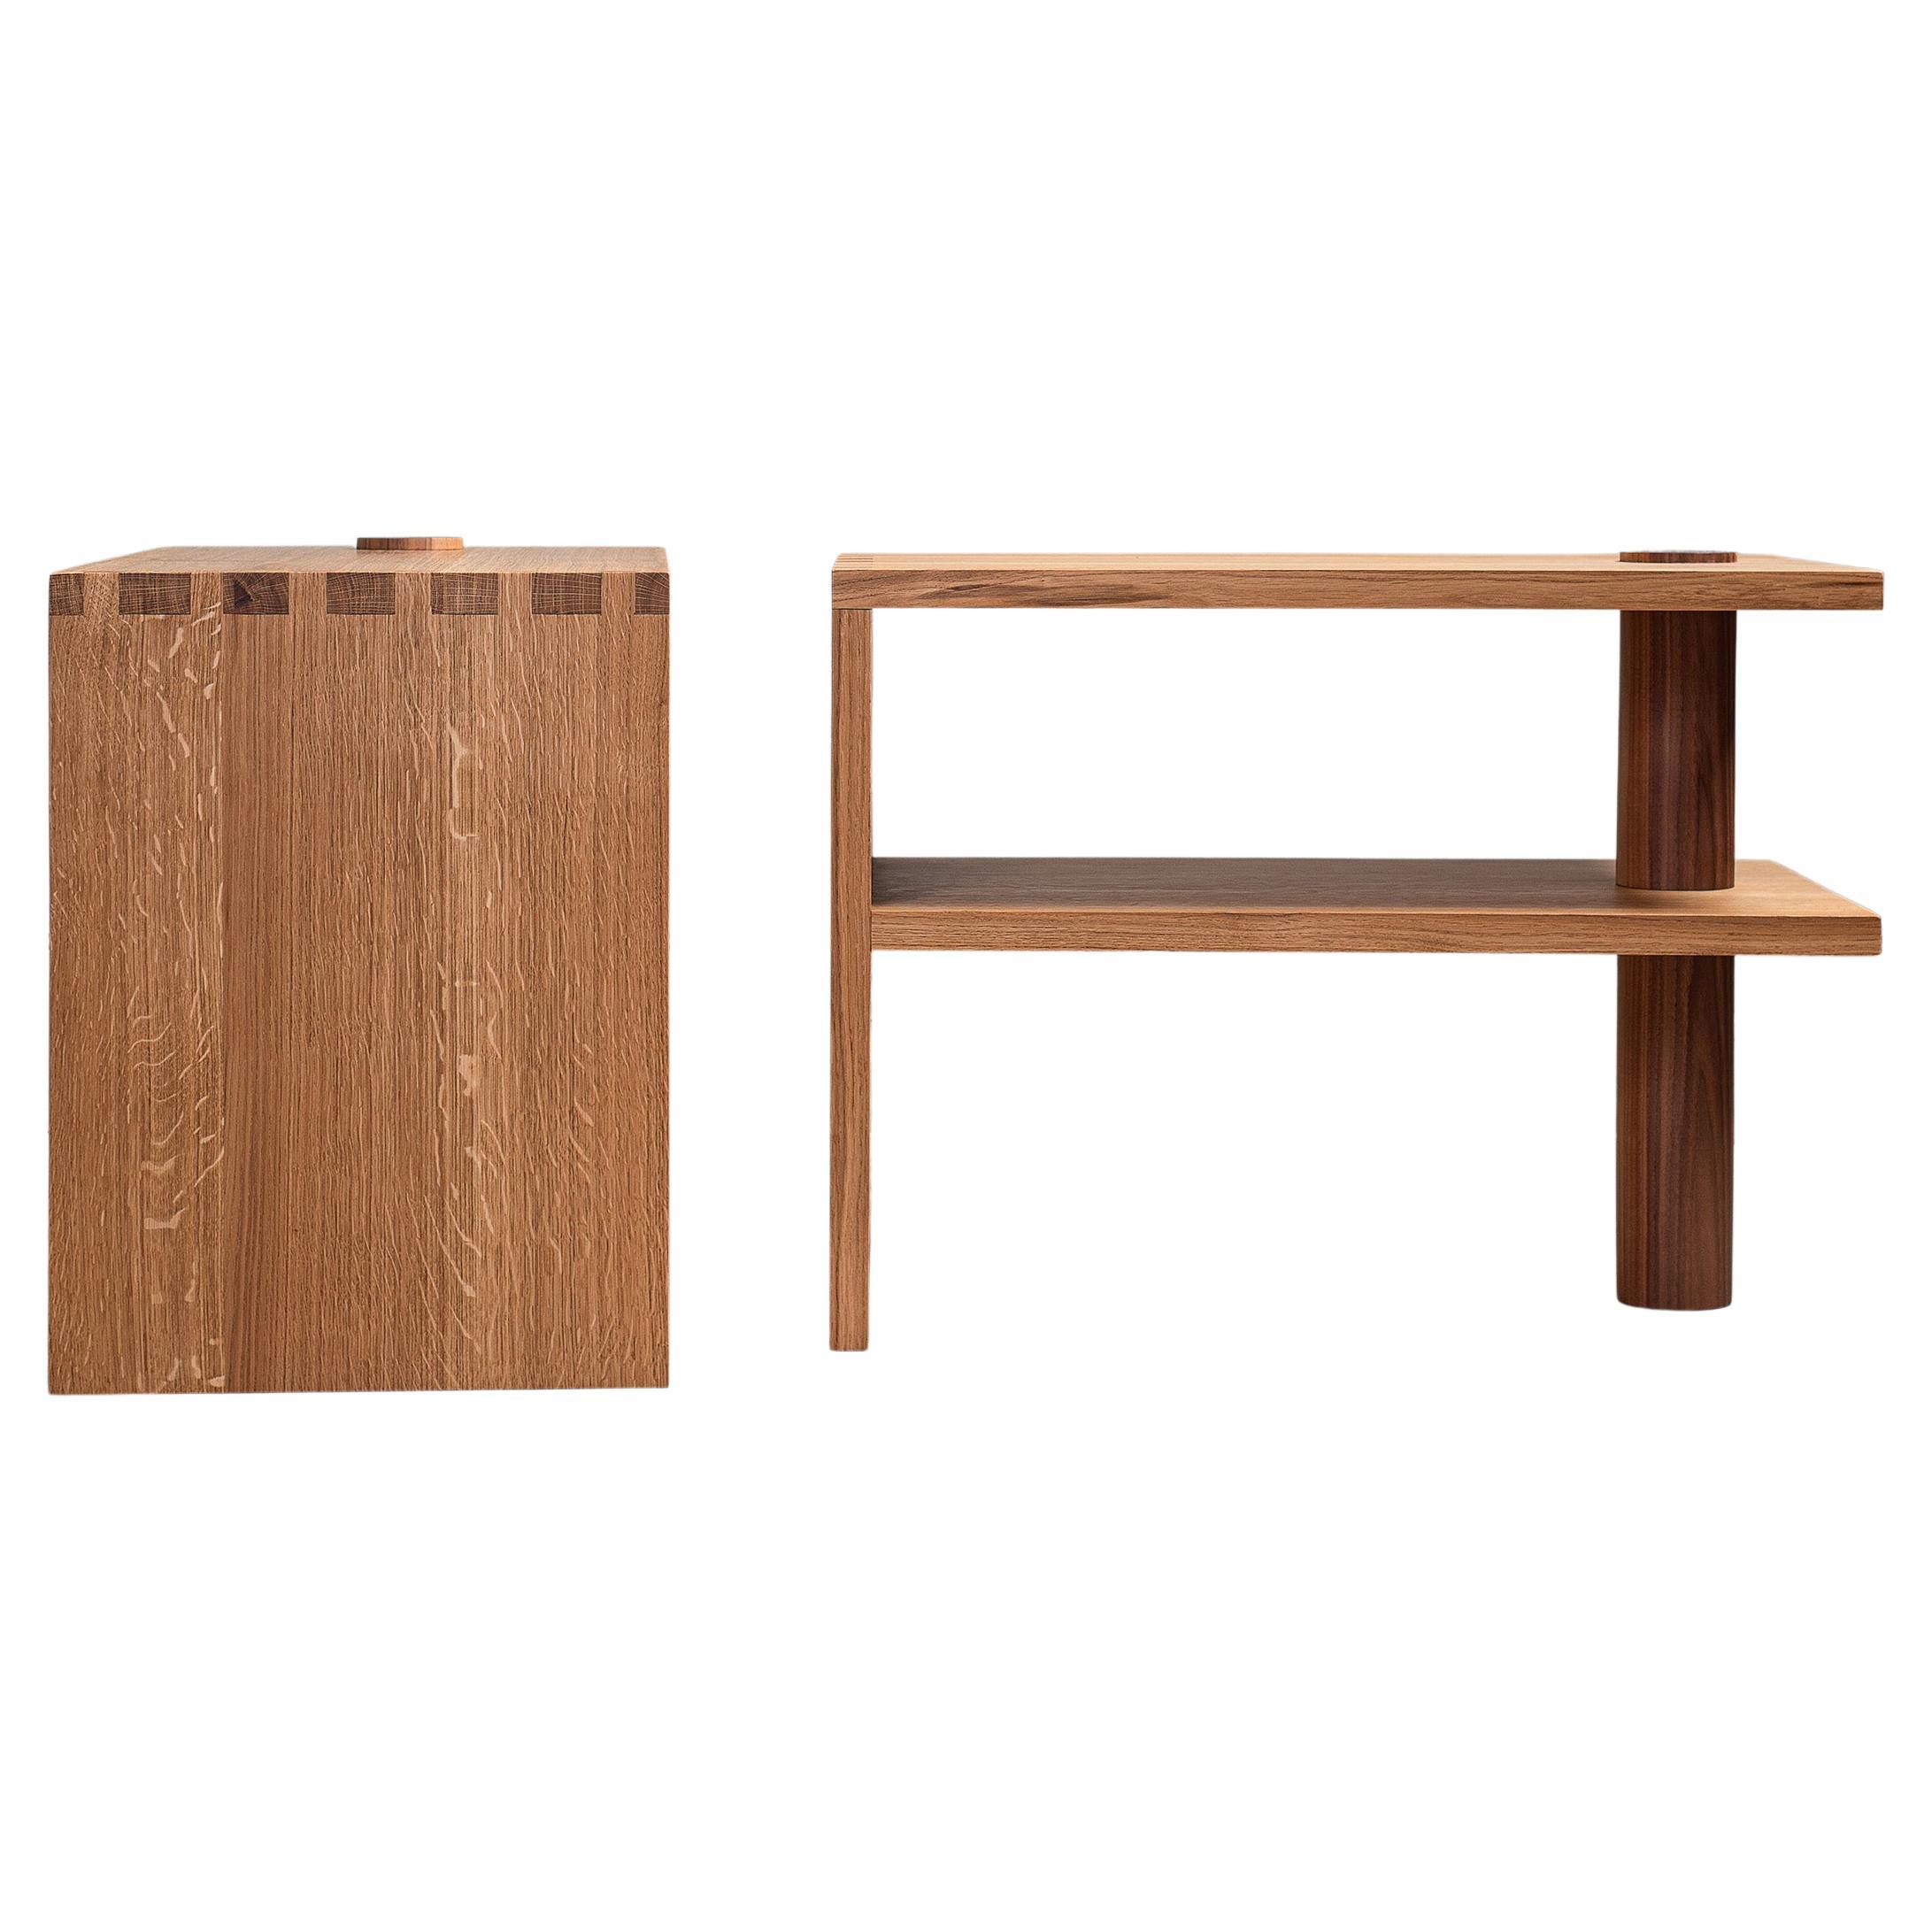 Monumentale Handcrafted Oak & Walnut Night Stands, End Tables im Angebot